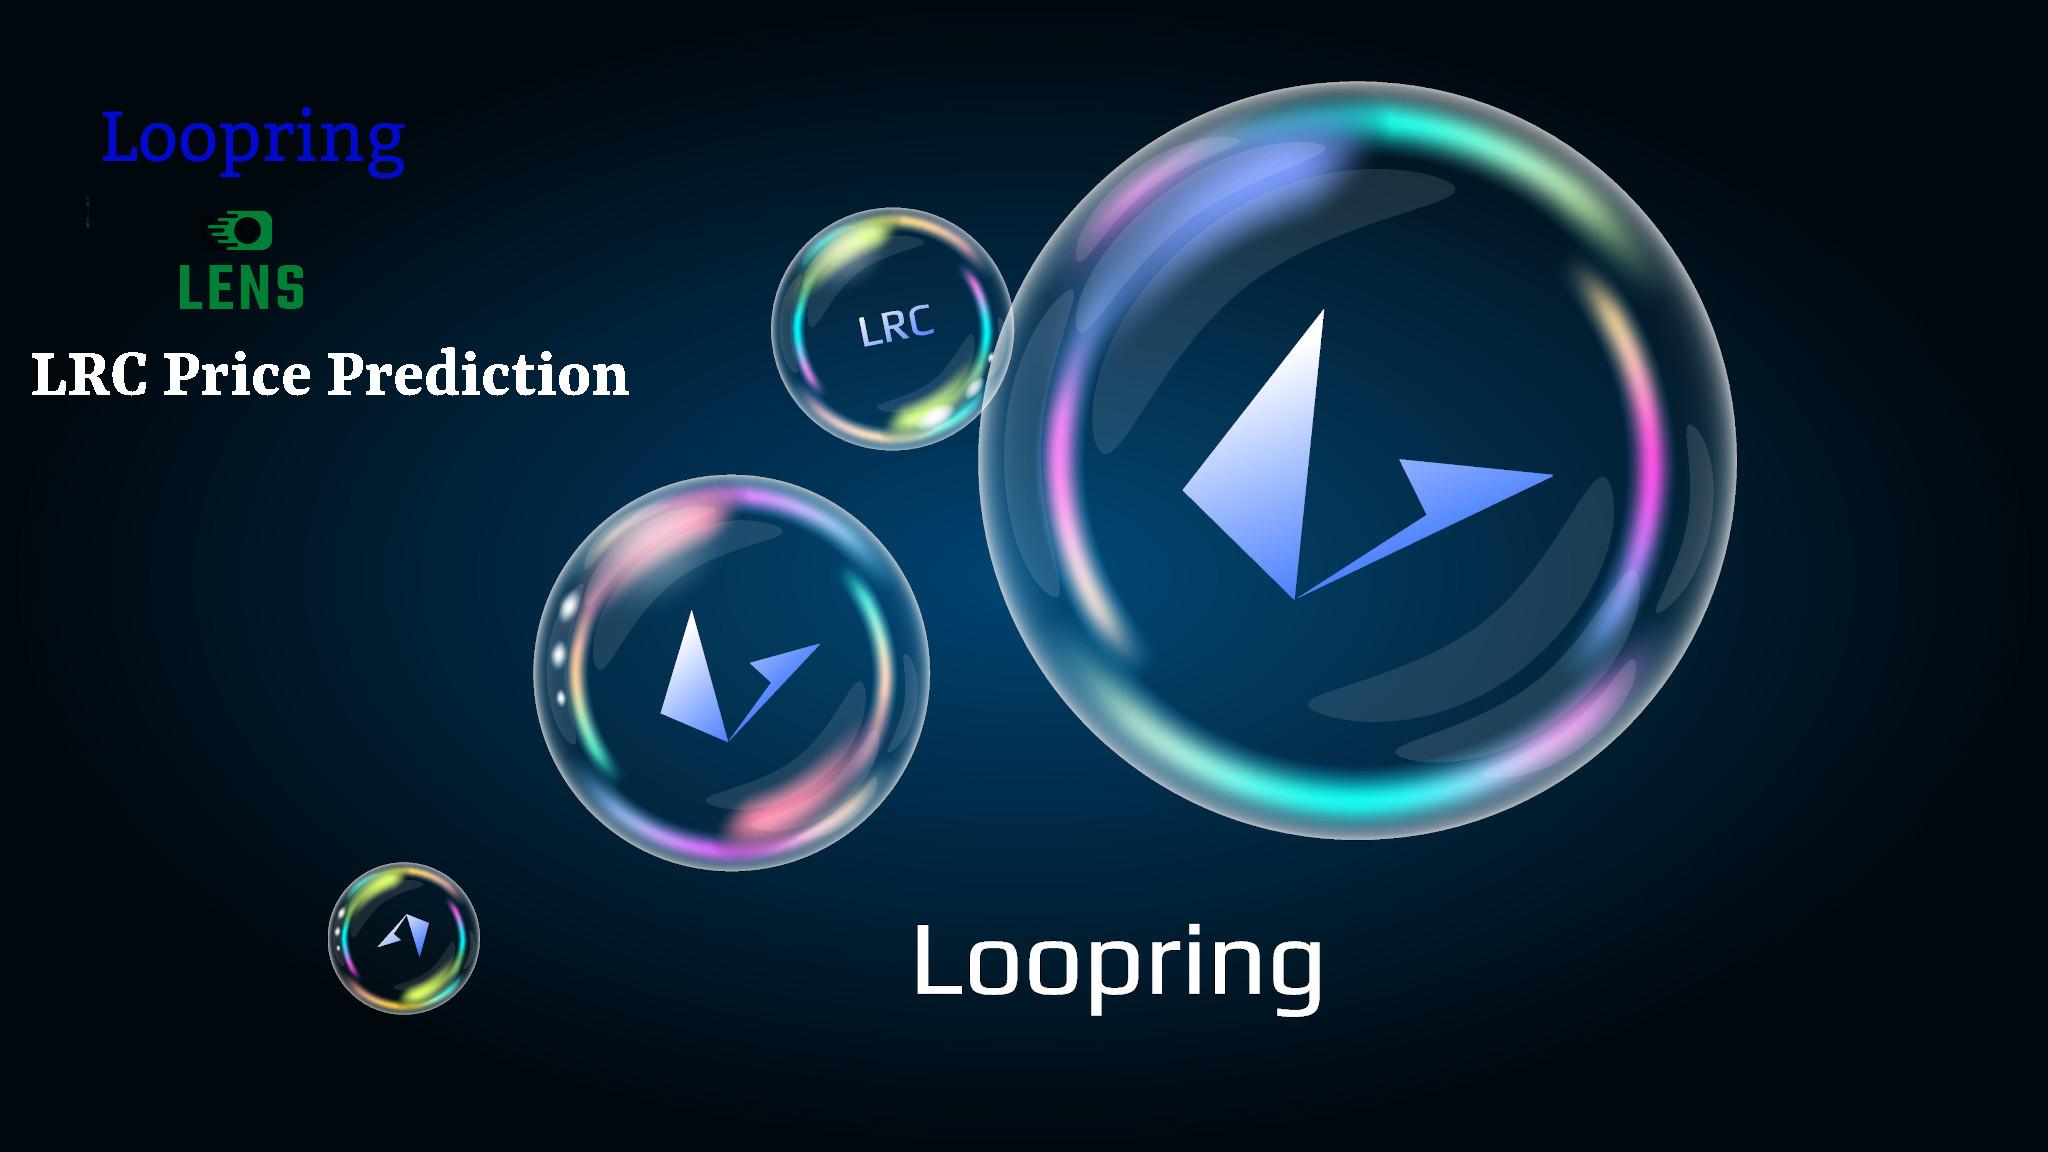 Get Expert Insight Into Loopring’s Perfomance & Catalysts For Future Growth